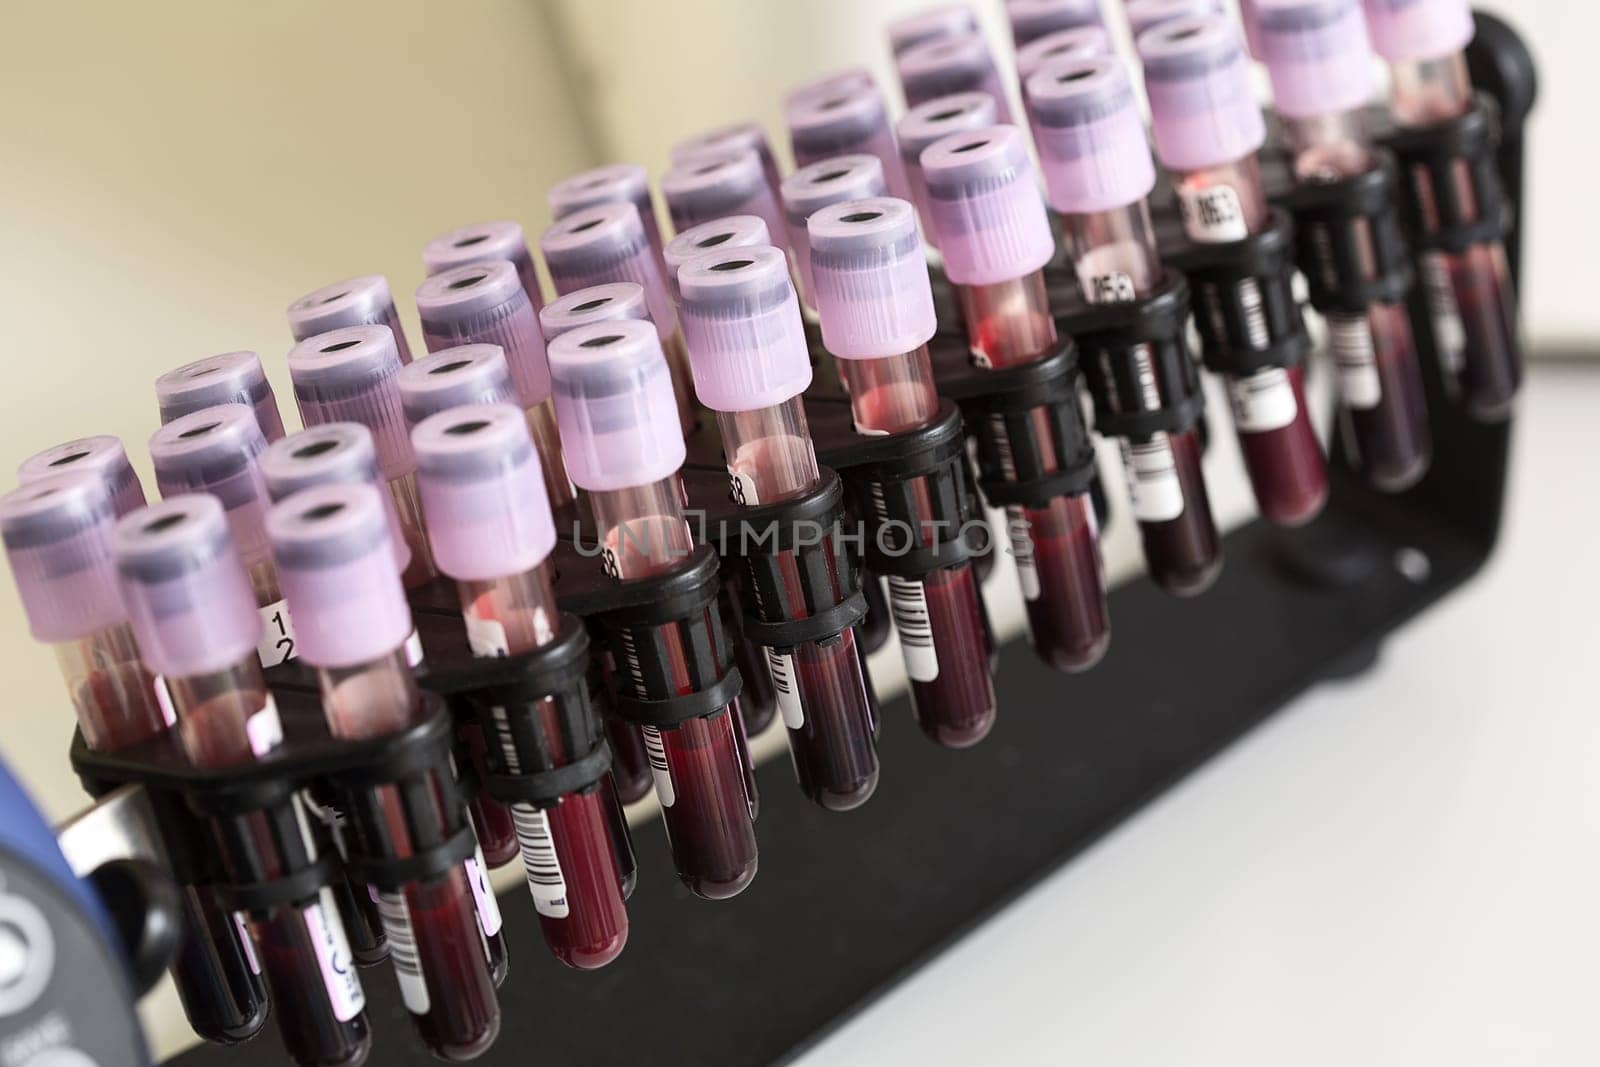 Tube blood sample in a medical examination. Medical research